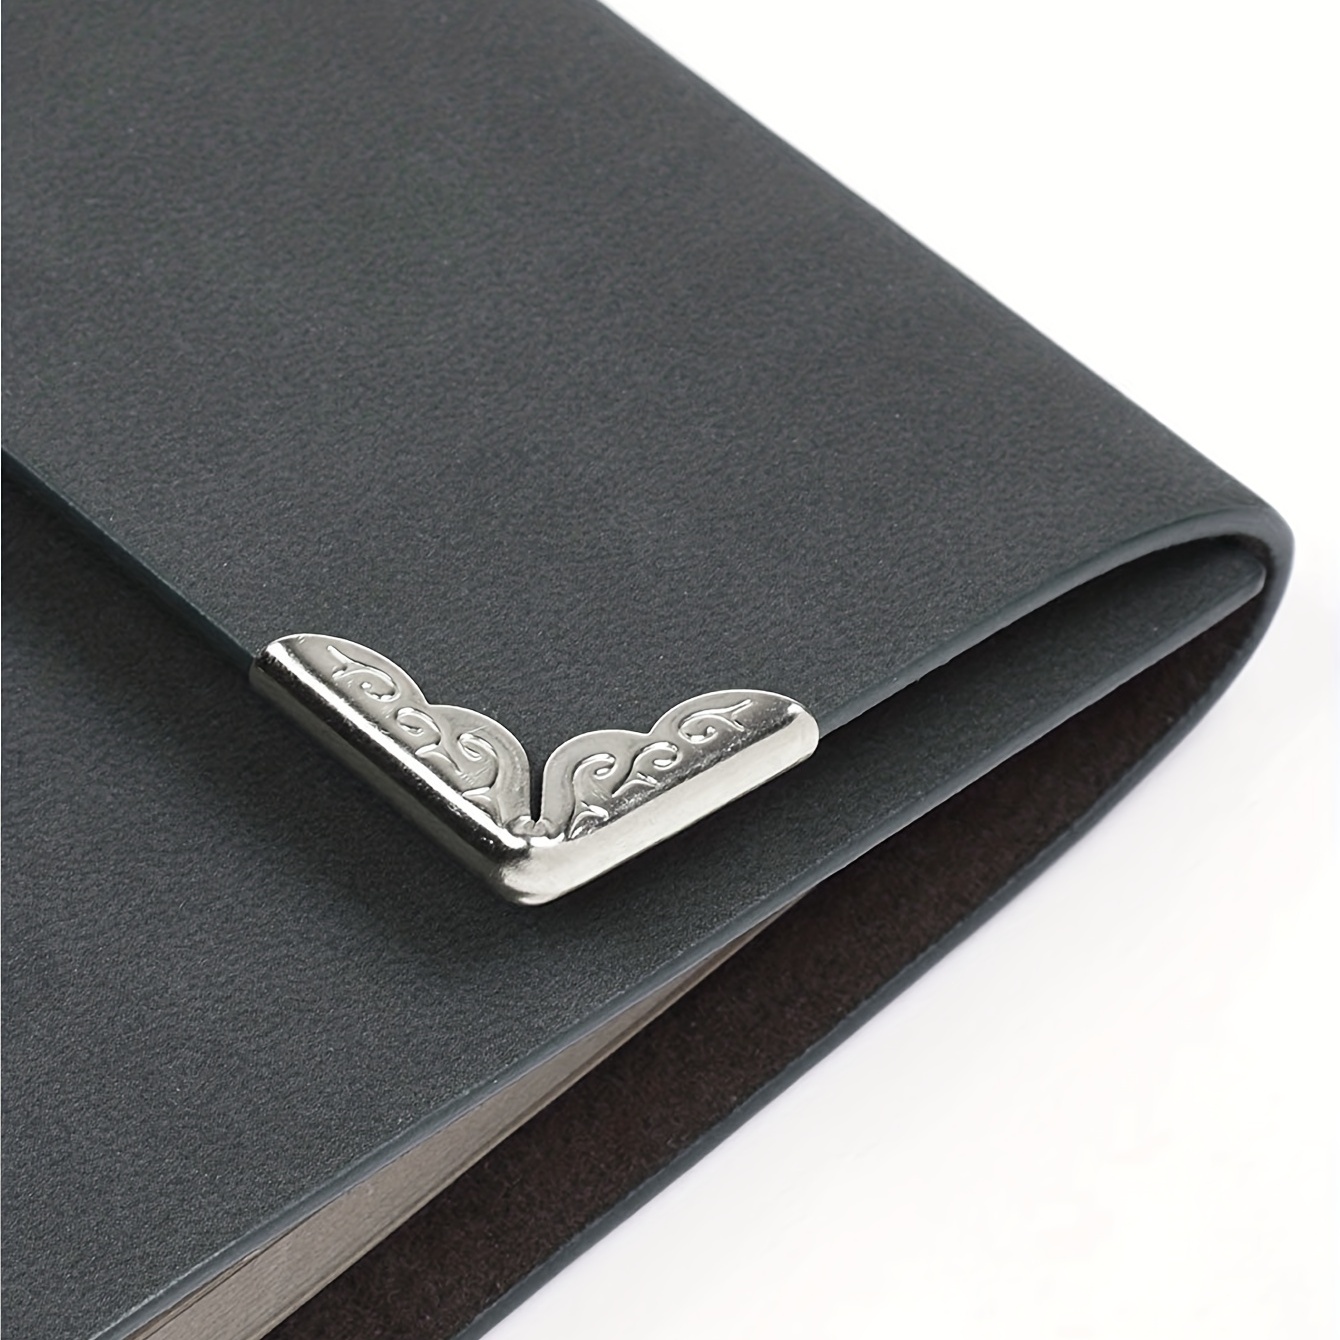 Metal Notebook Diary Corner Protector, Size/Dimension: 2.5x2.5 Inch at Rs 2  in New Delhi